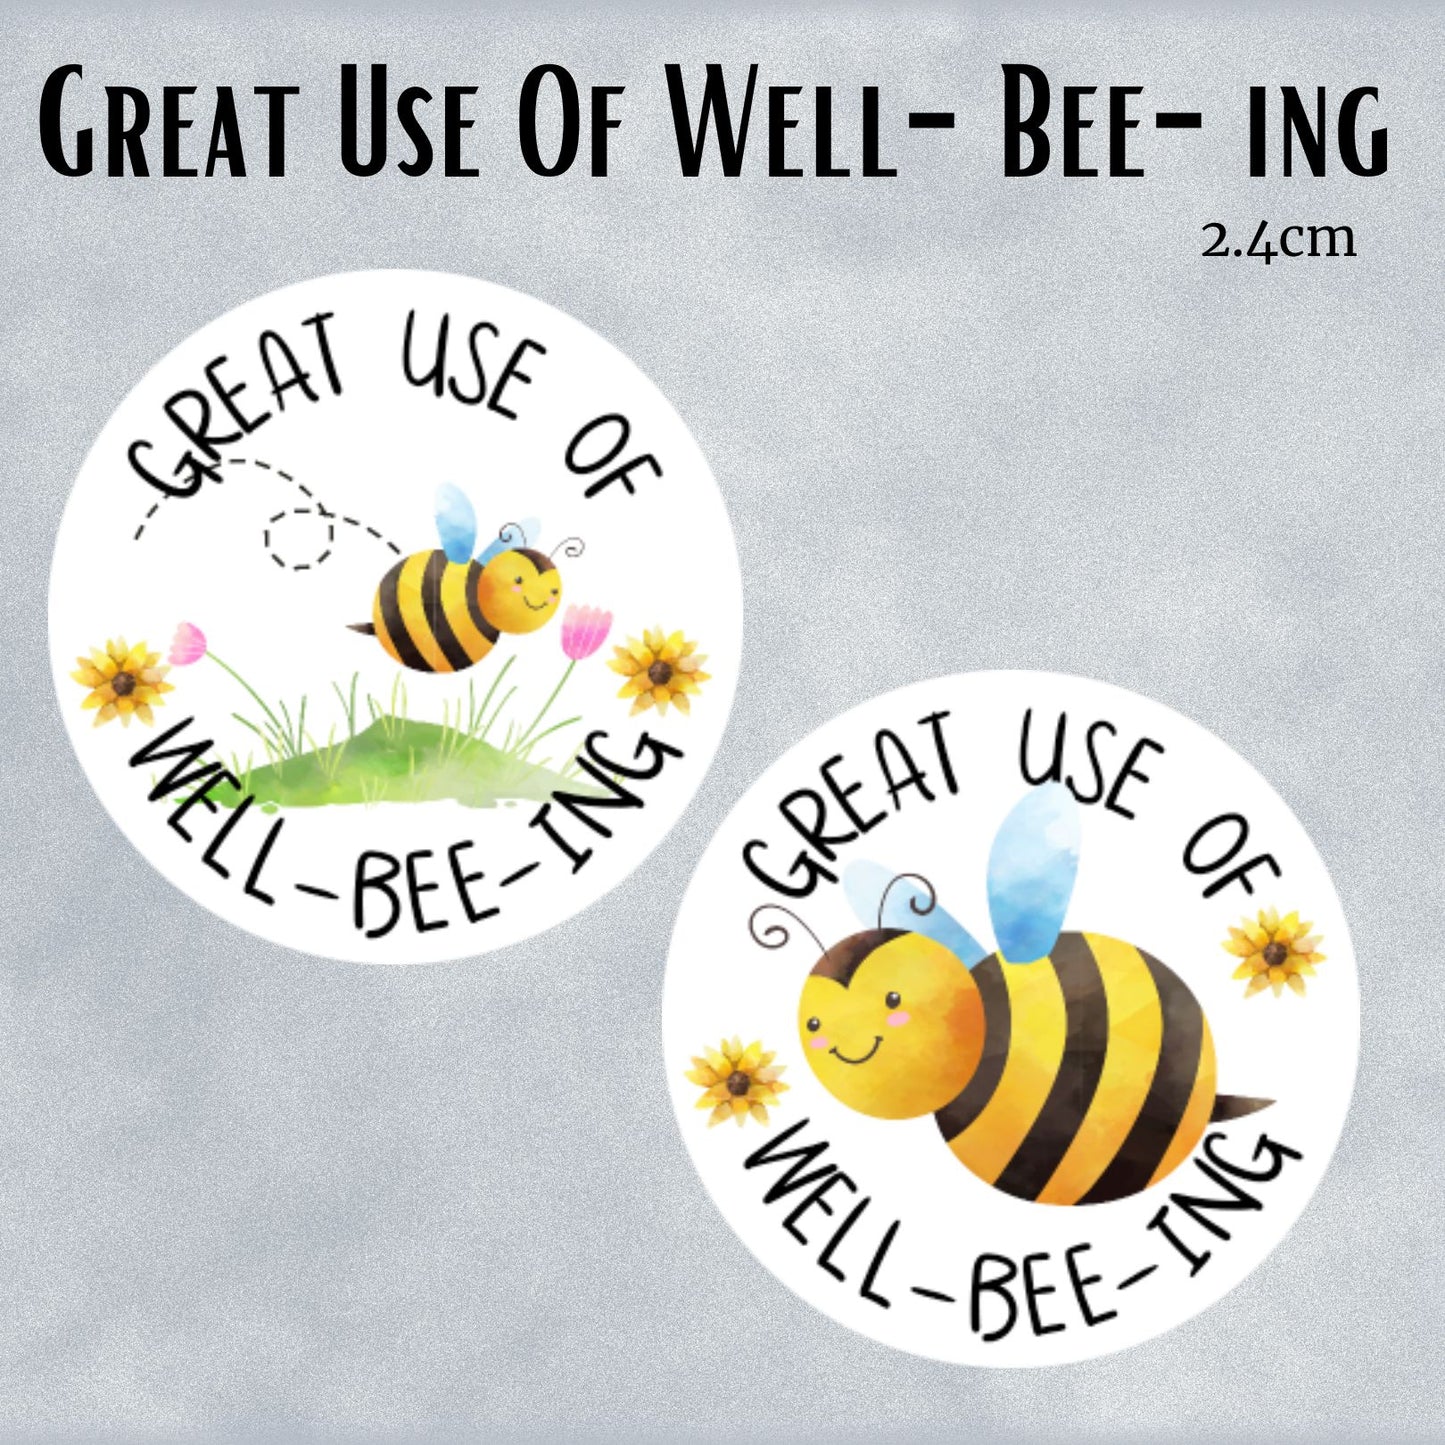 Great Use of Well-bee-ing BEE General Merit Sheet